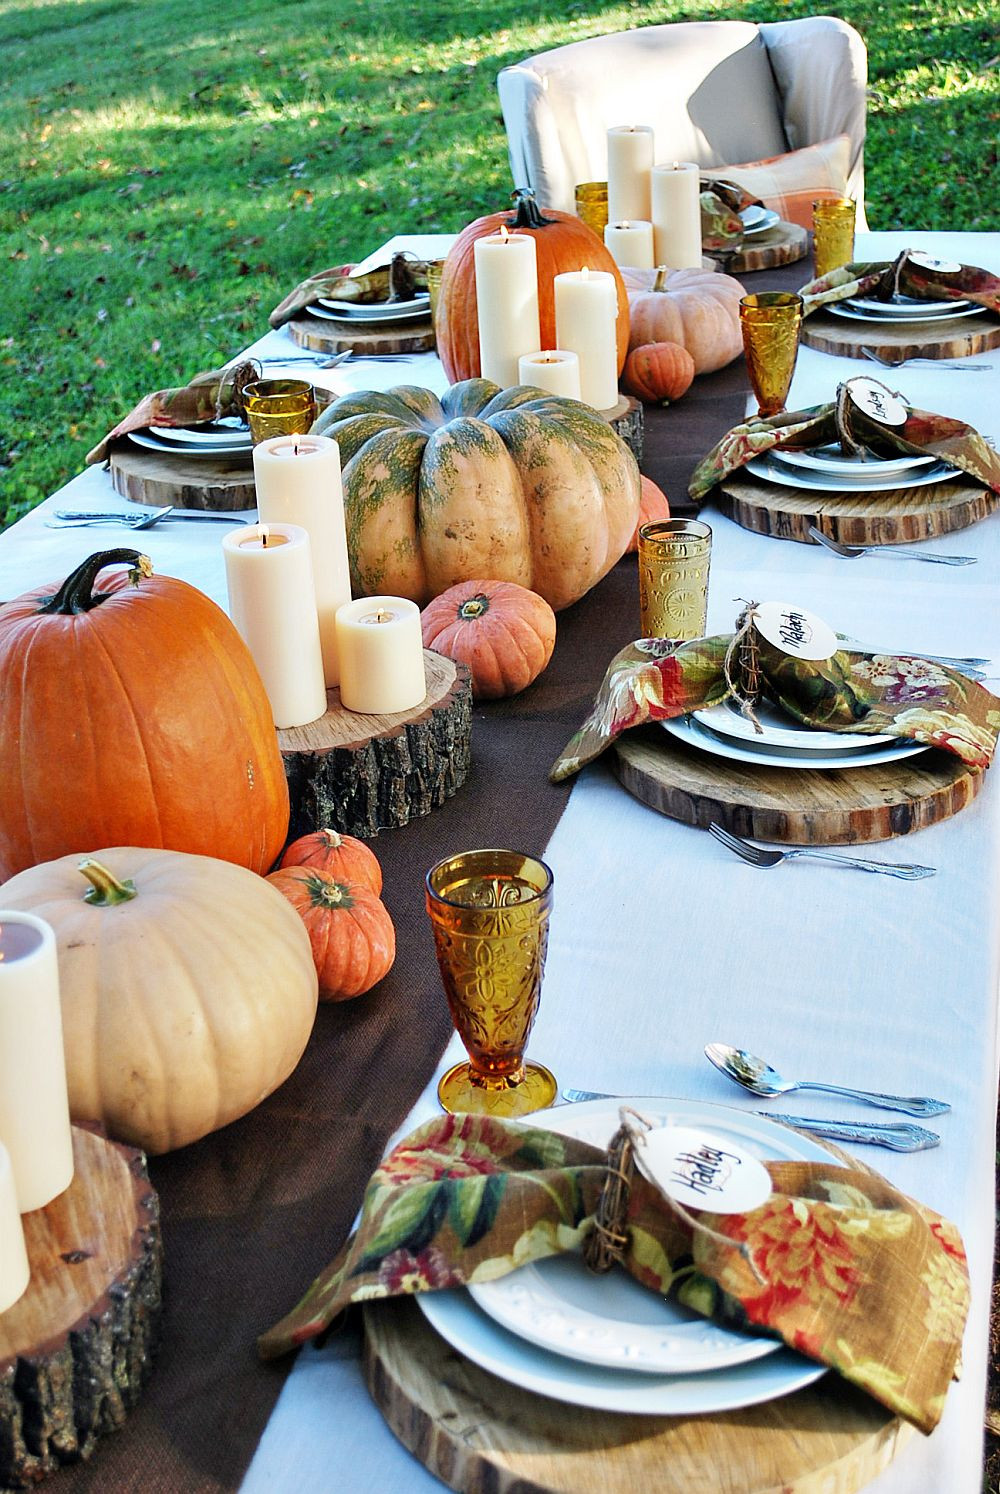 Turkey Decorations For Thanksgiving
 15 Outdoor Thanksgiving Table Settings for Dining Alfresco